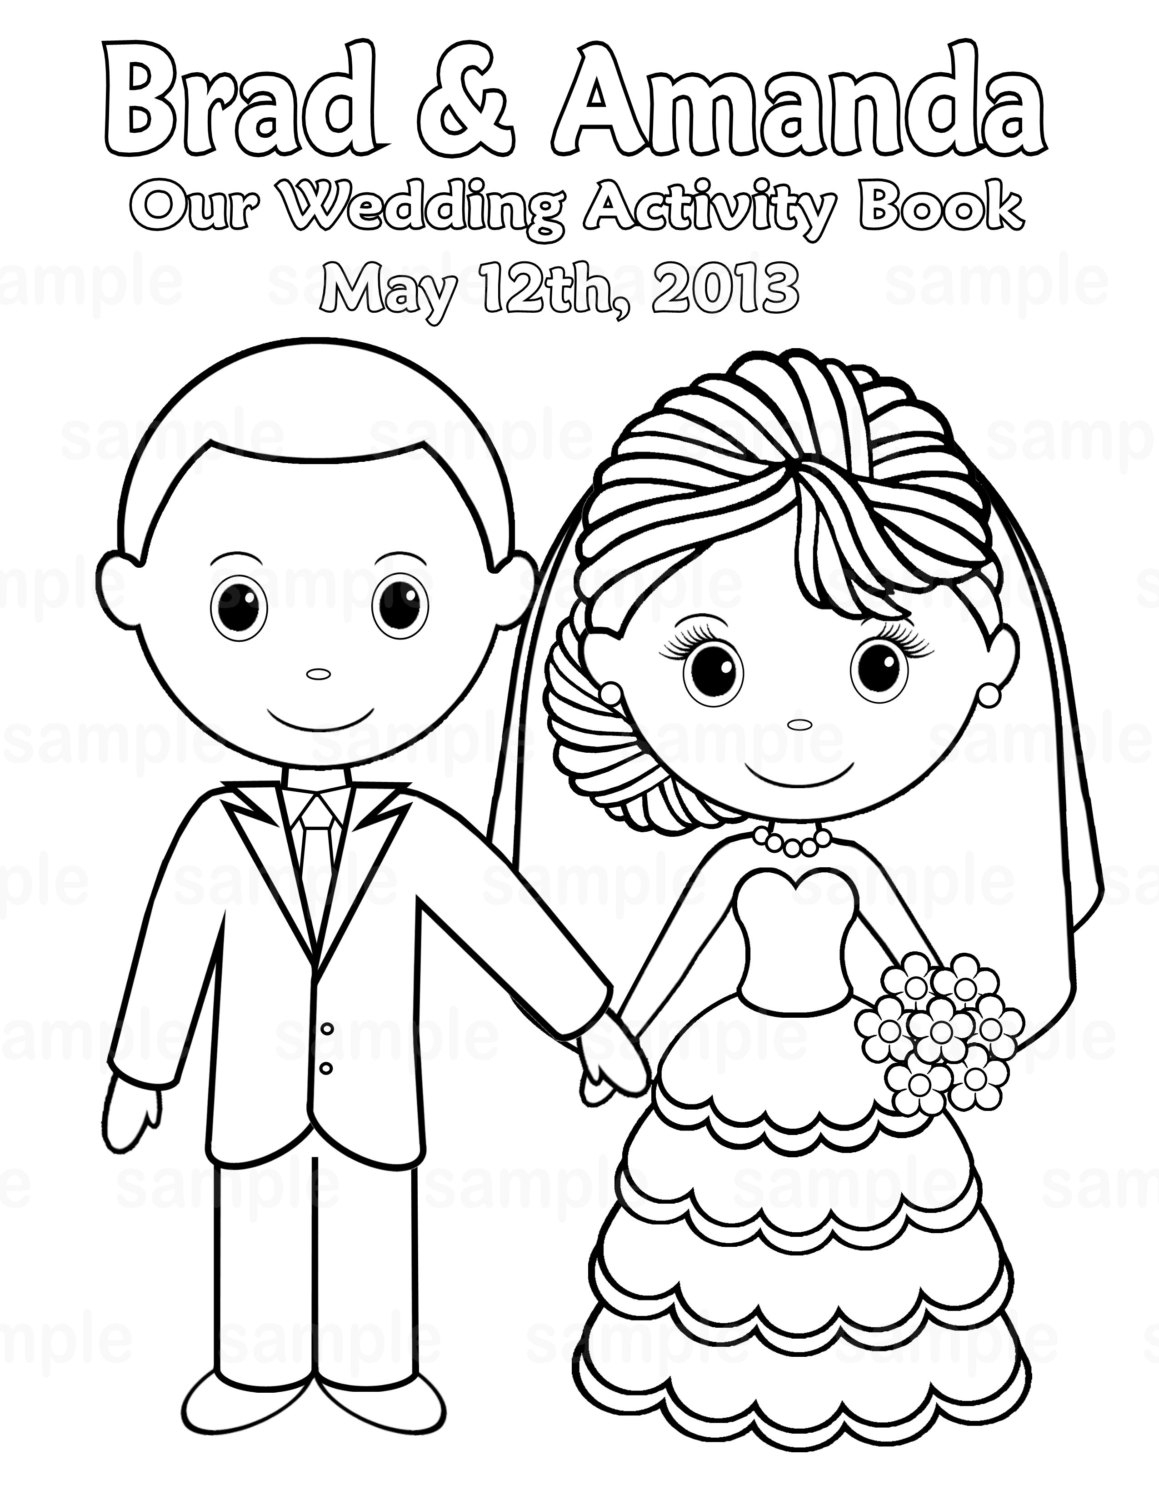 Coloring Pages : Kidsing Coloring Book Fantastic Pdfkids - Free Printable Personalized Wedding Coloring Book